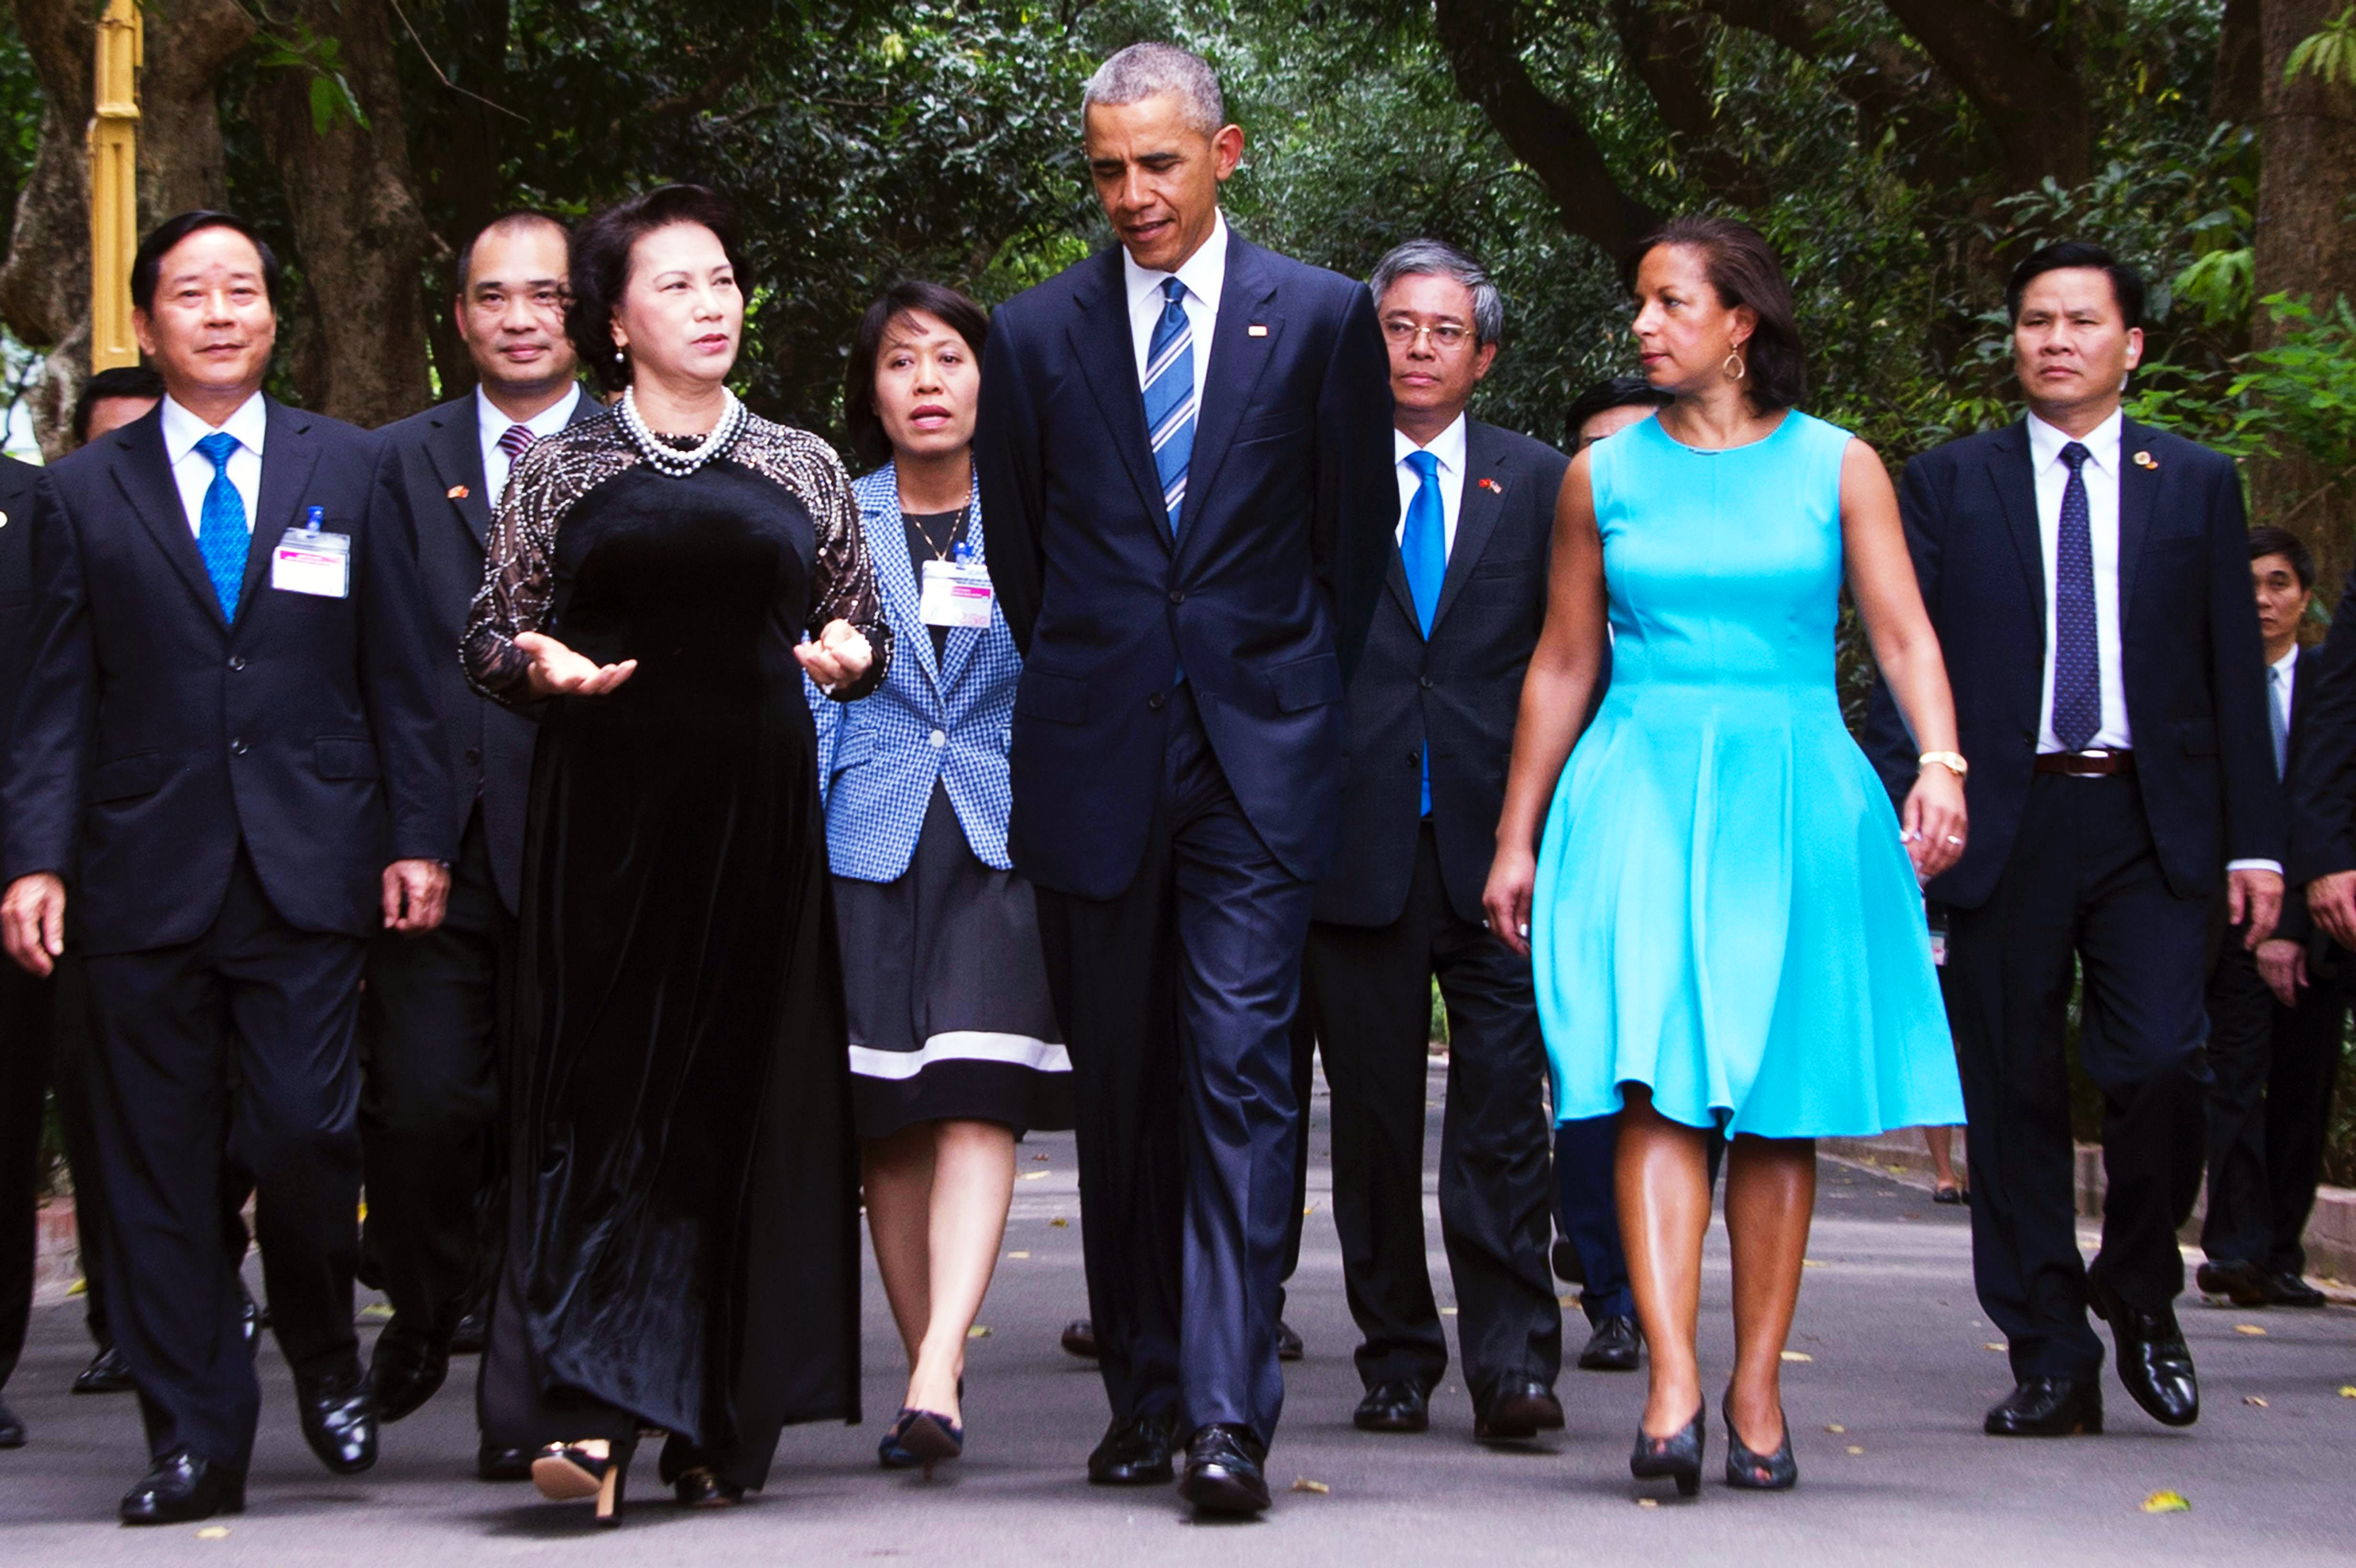 President Barack Obama walks with Vietnam's National Assembly Chairwoman Nguyen Thi Kim Ngan during his visit to the Presidential Palace in Hanoi on May 23.